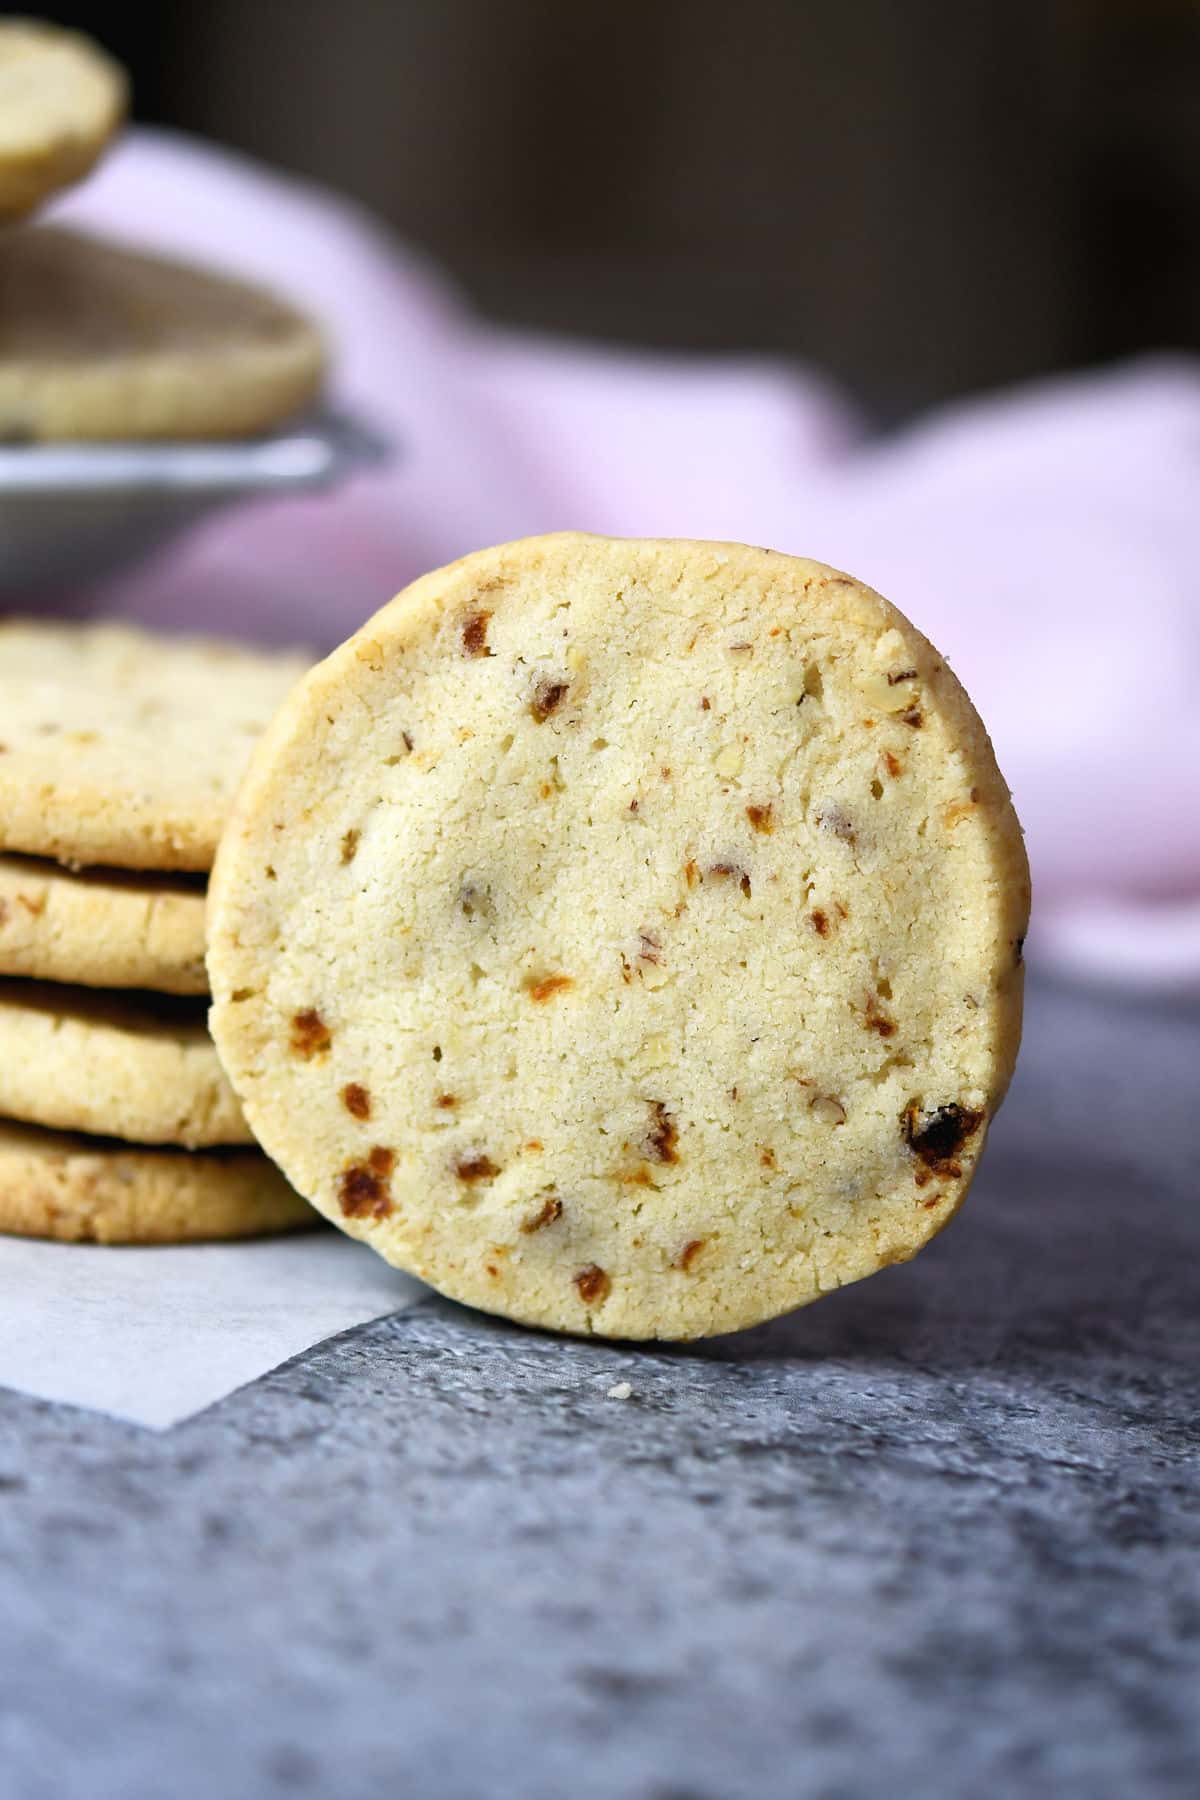 24Bite: Apricot Shortbread Cookie with Pecans Recipe by Christian Guzman